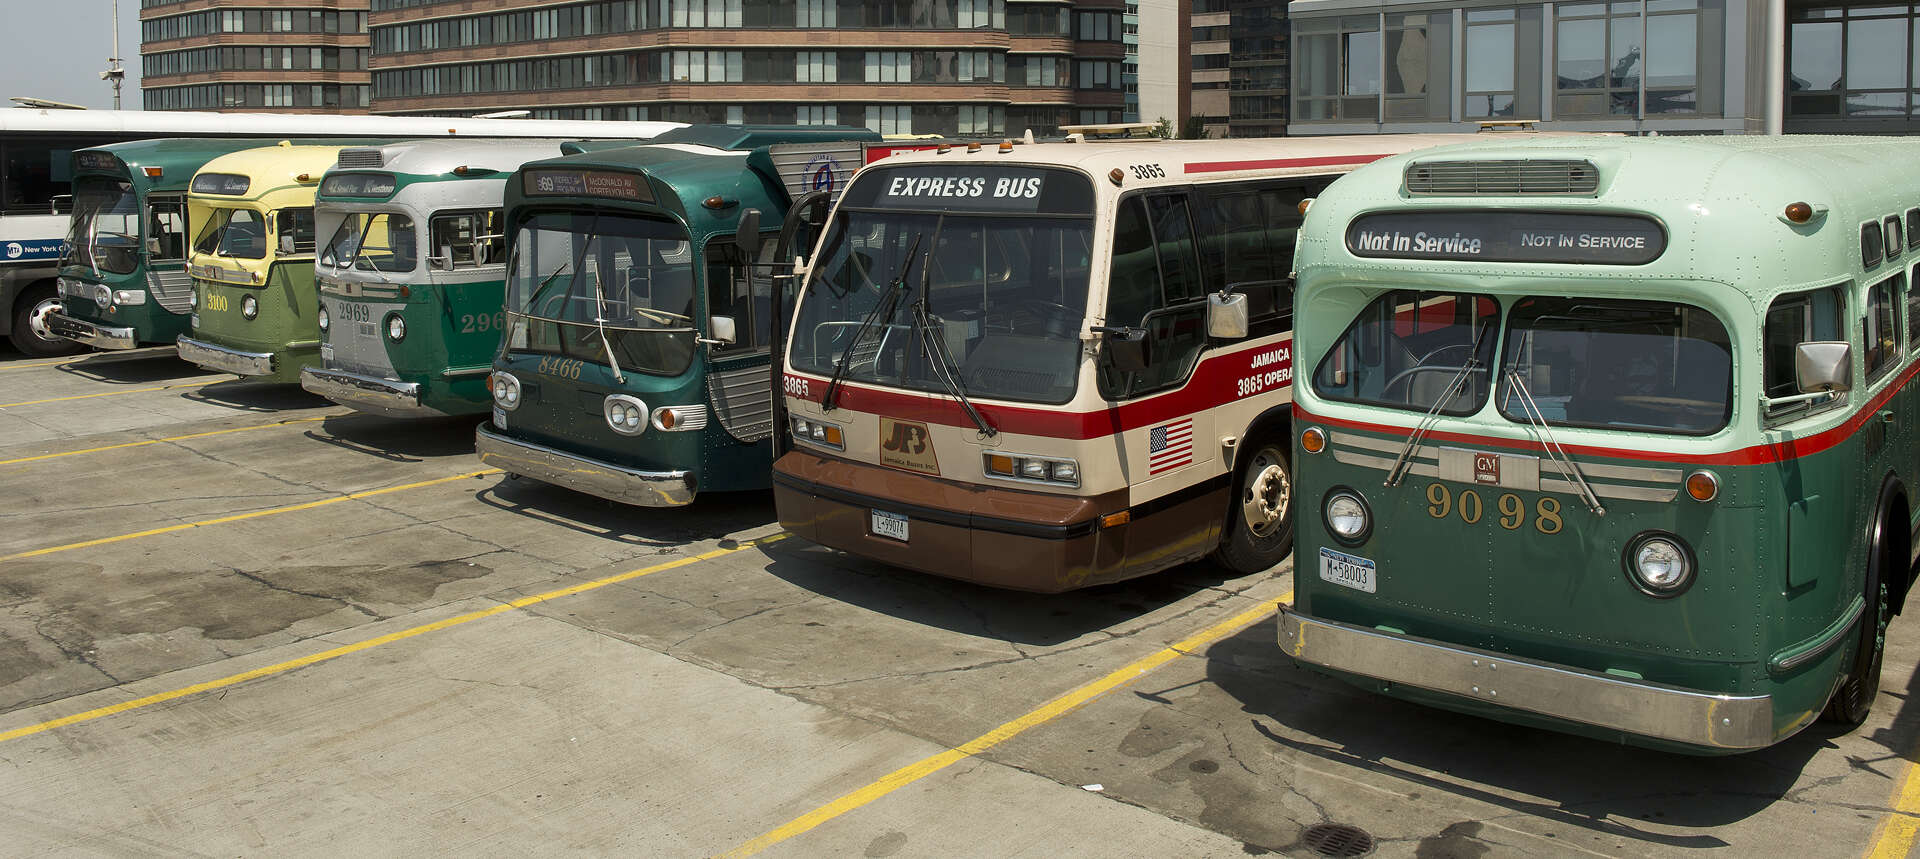 Buses scheduled to be at the 2023 Bus Festival parked side by side